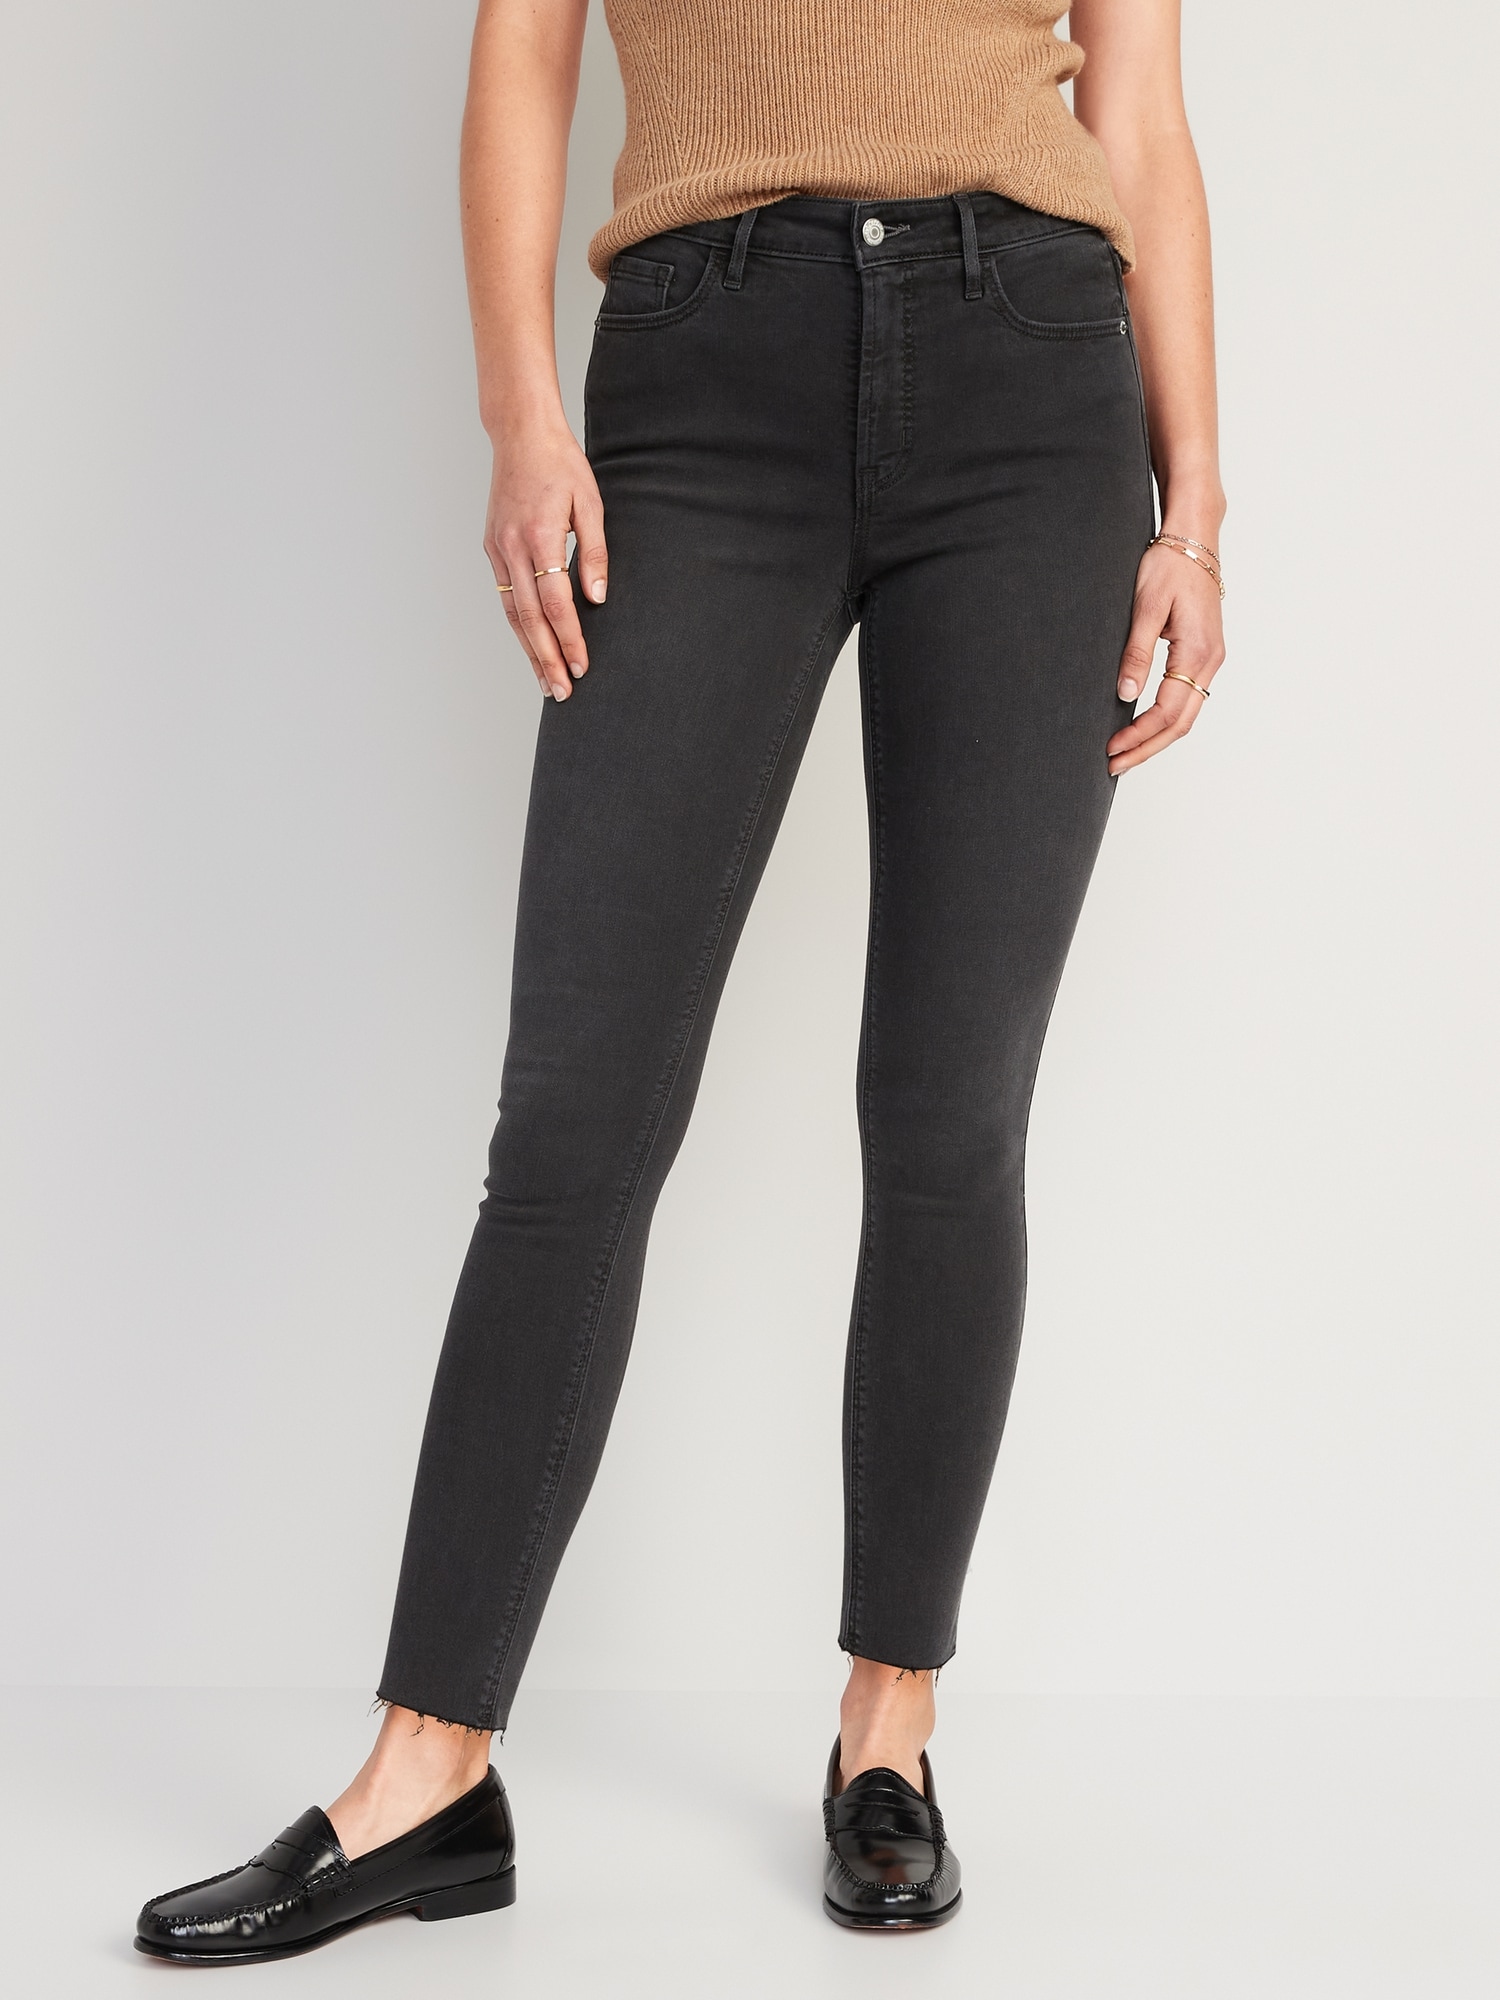 High-Waisted Rockstar Super-Skinny Black Cut-Off Ankle Jeans for Women